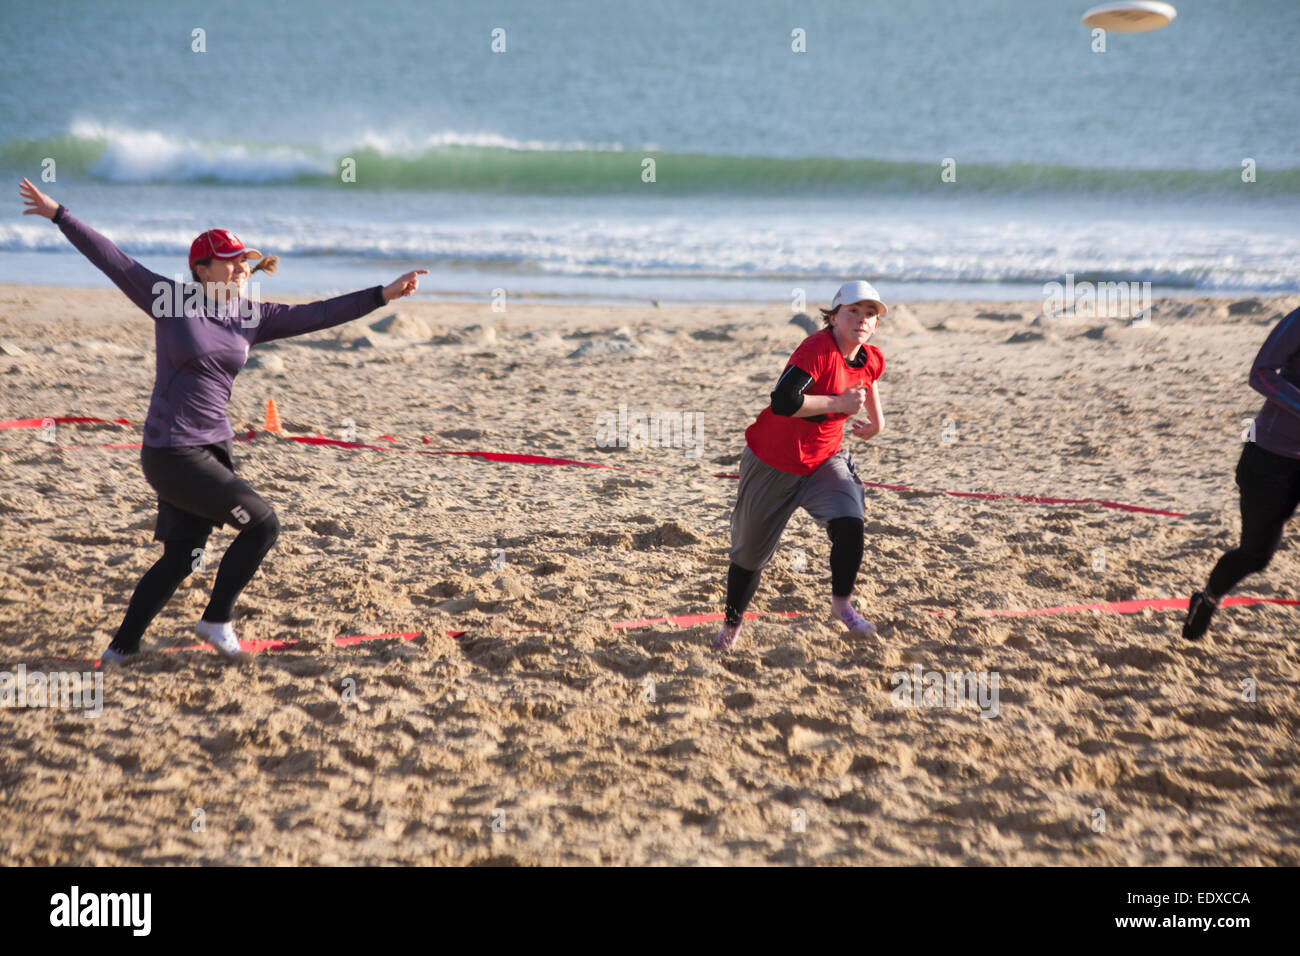 Sandbanks beach, Poole, Dorset, UK. 11th January, 2015. Ultimate Frisbee Beach Tournament takes place on Sandbanks beach with ten teams taking part, including four GB teams as part of their training towards the World Championships of Beach Ultimate. Credit:  Carolyn Jenkins/Alamy Live News Stock Photo